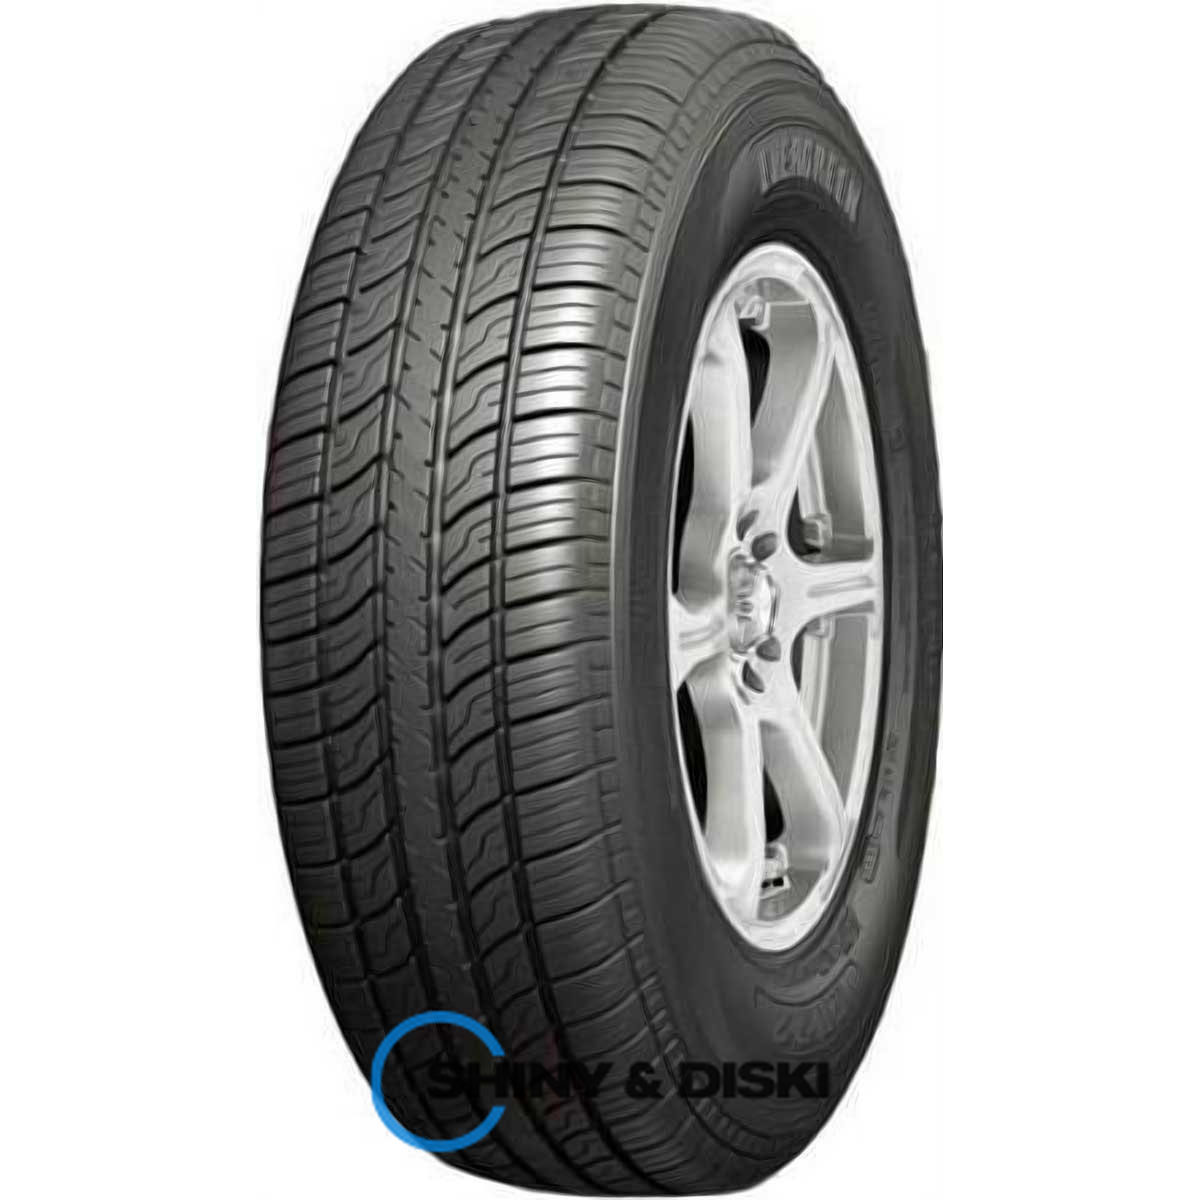 evergreen eh22 205/70 r14 98t